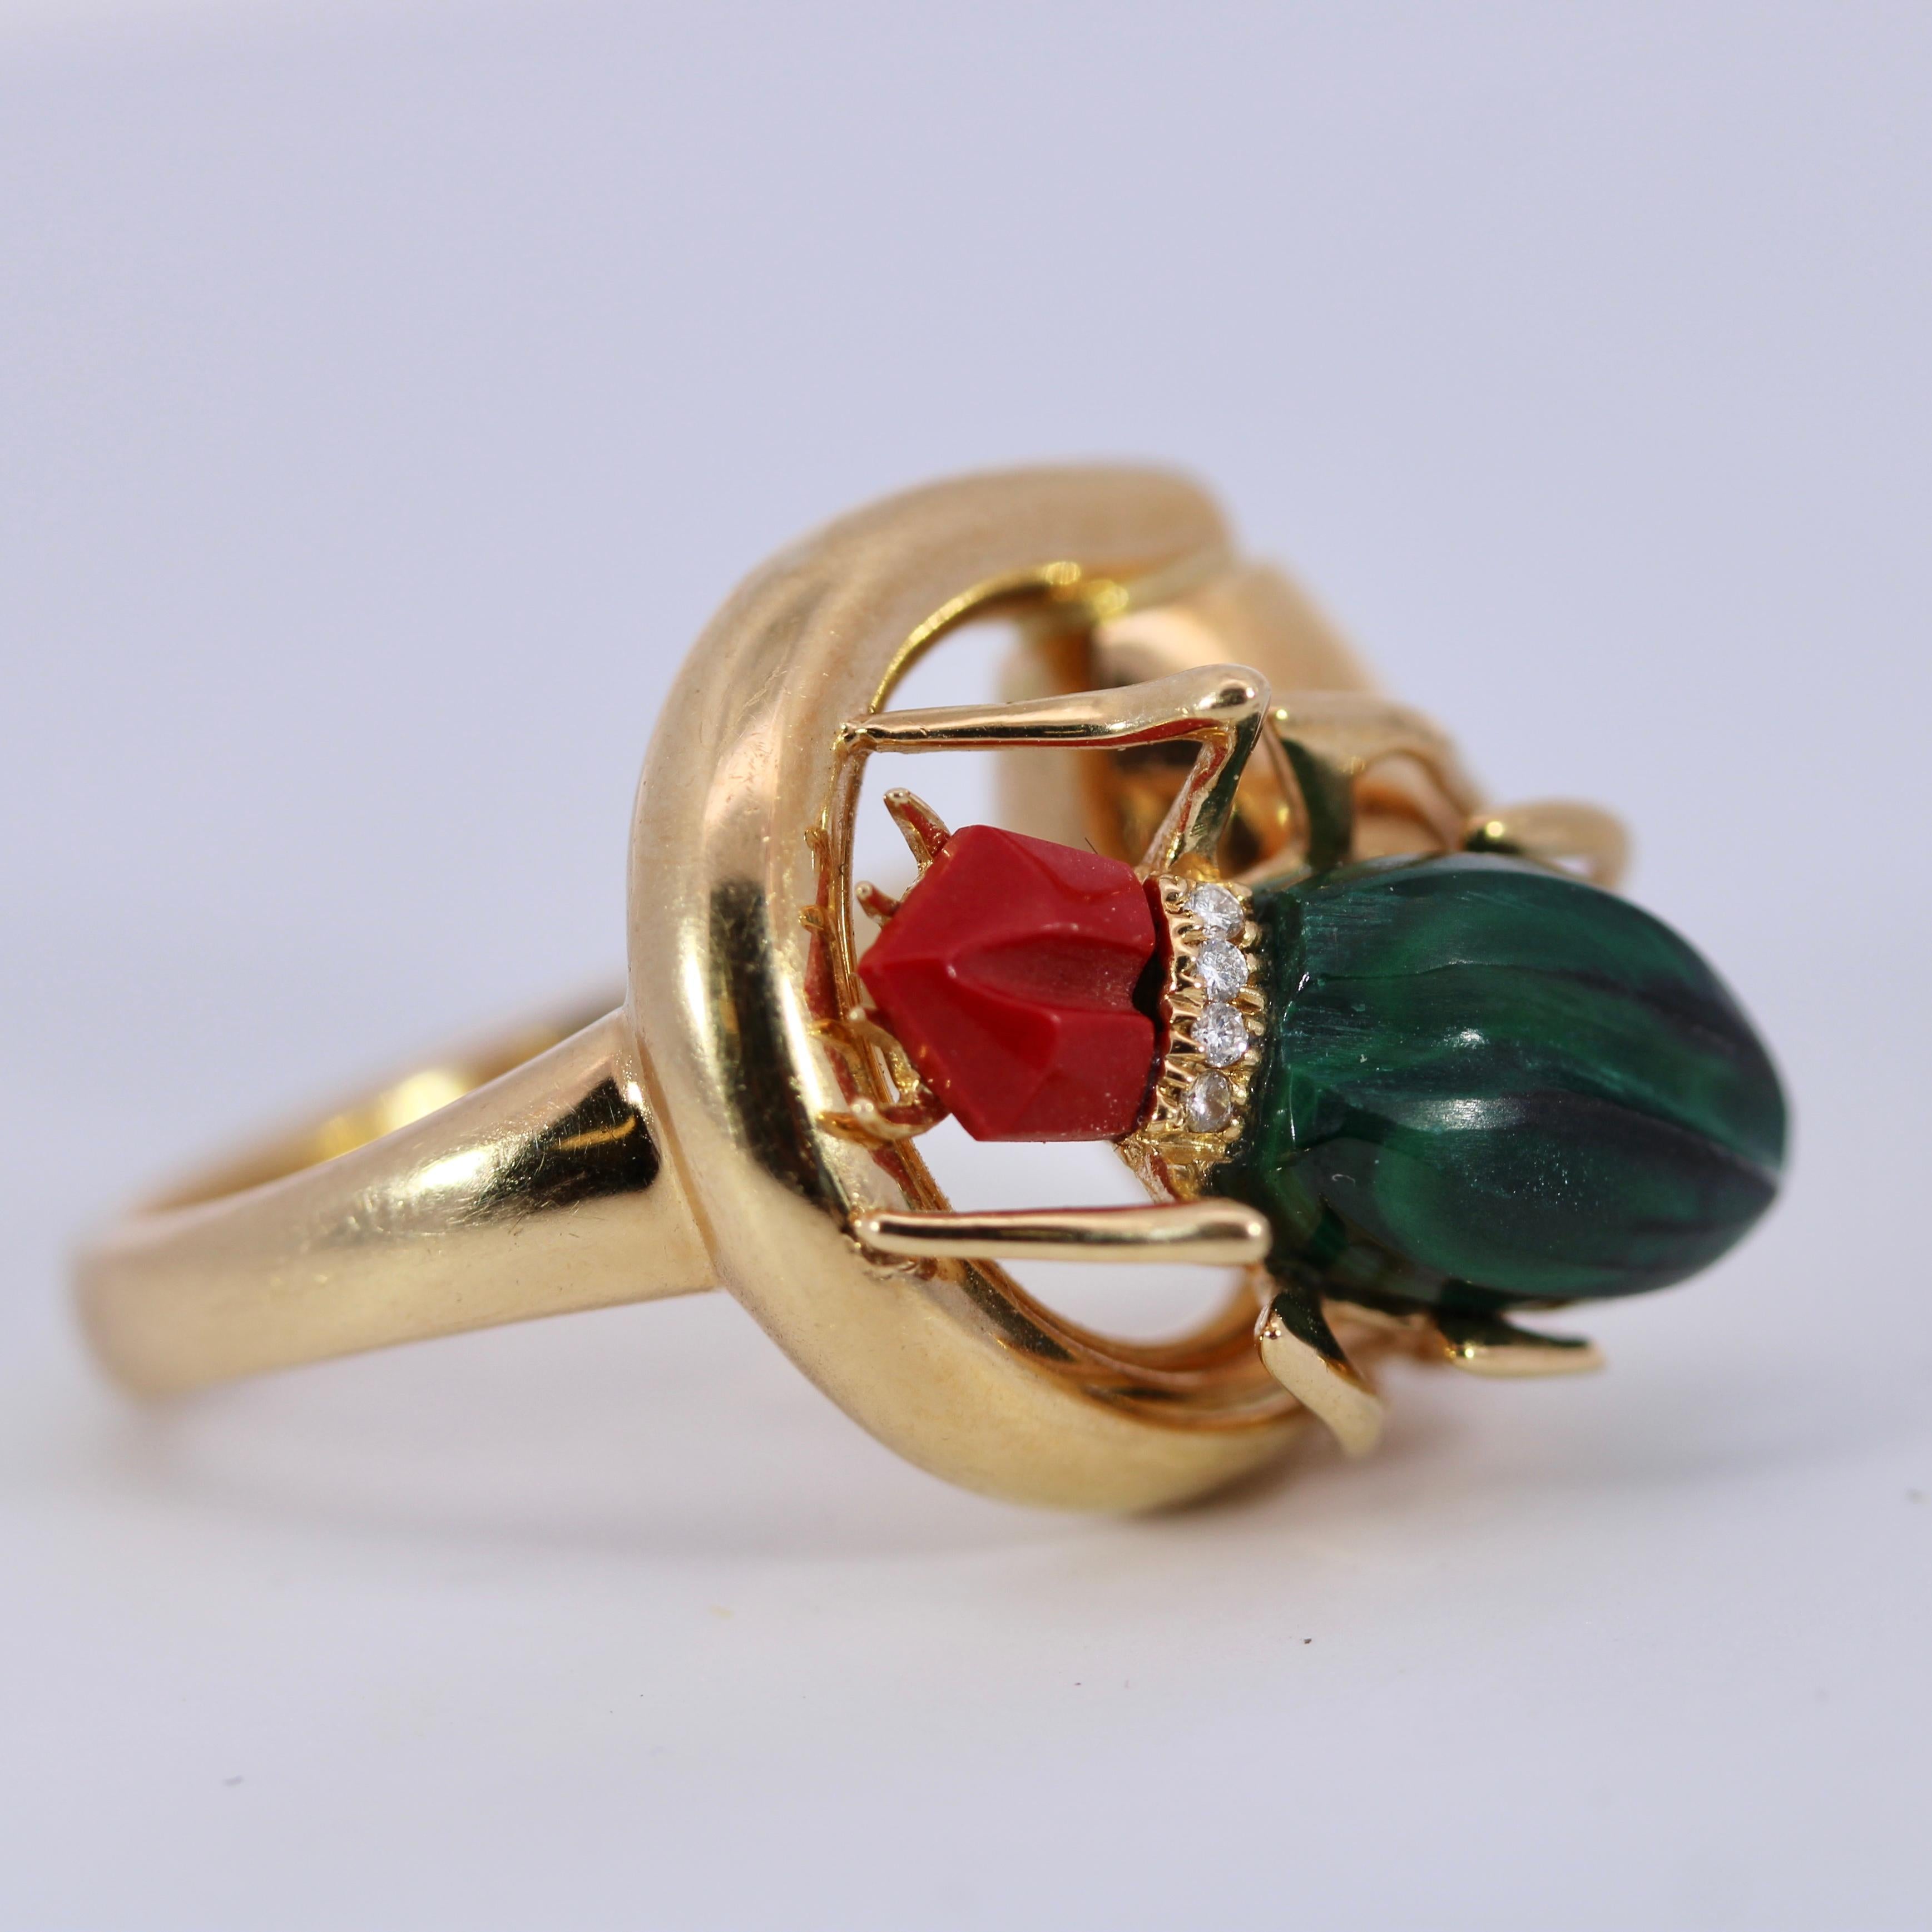 Gucci Milano 18K Yellow Gold Beetle Ring With Diamonds, Coral And Malachi 1